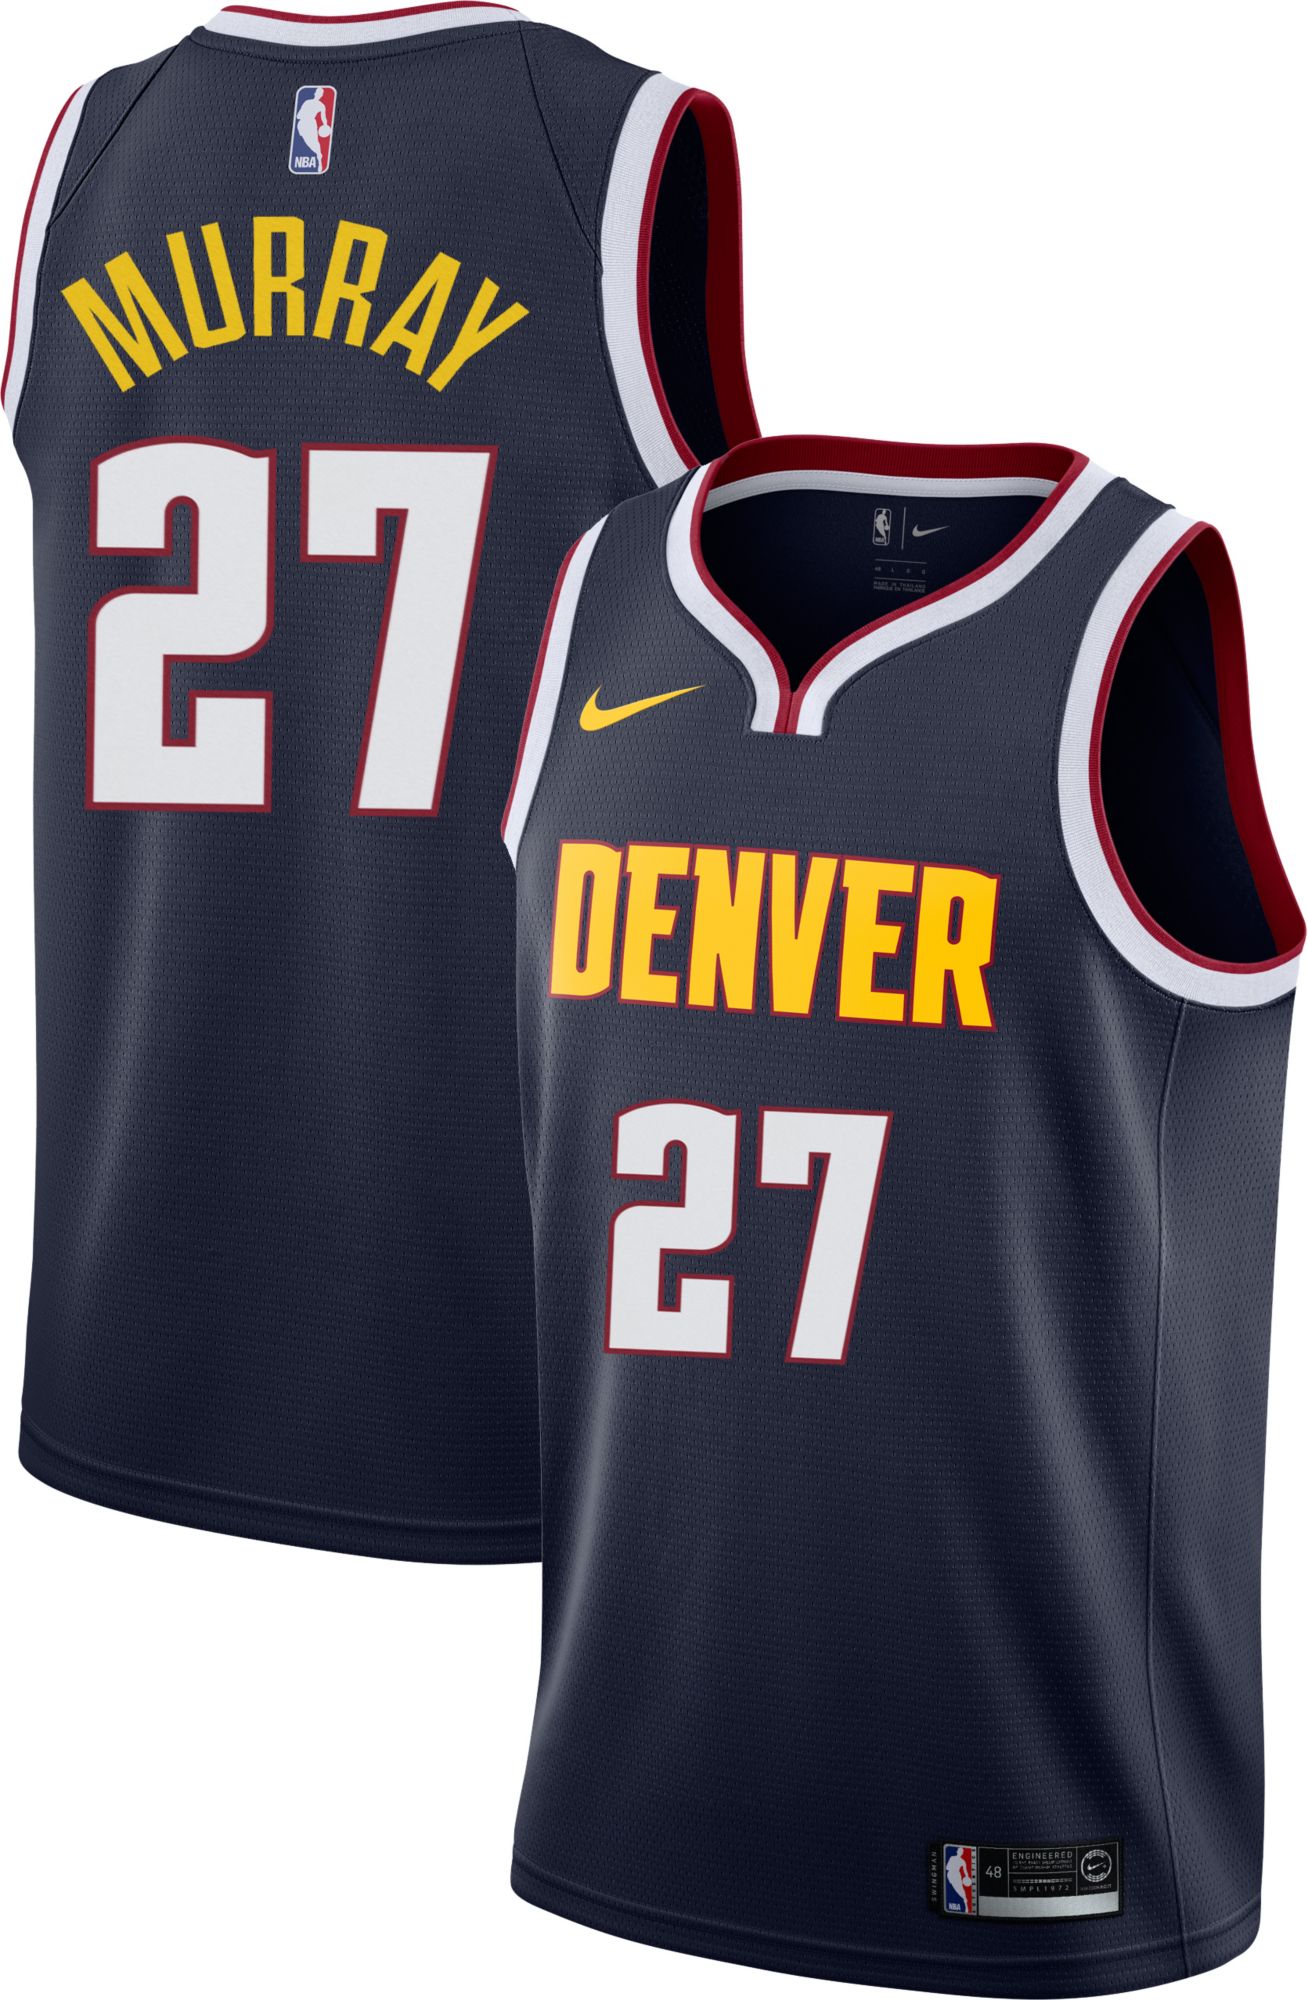 murray nuggets jersey